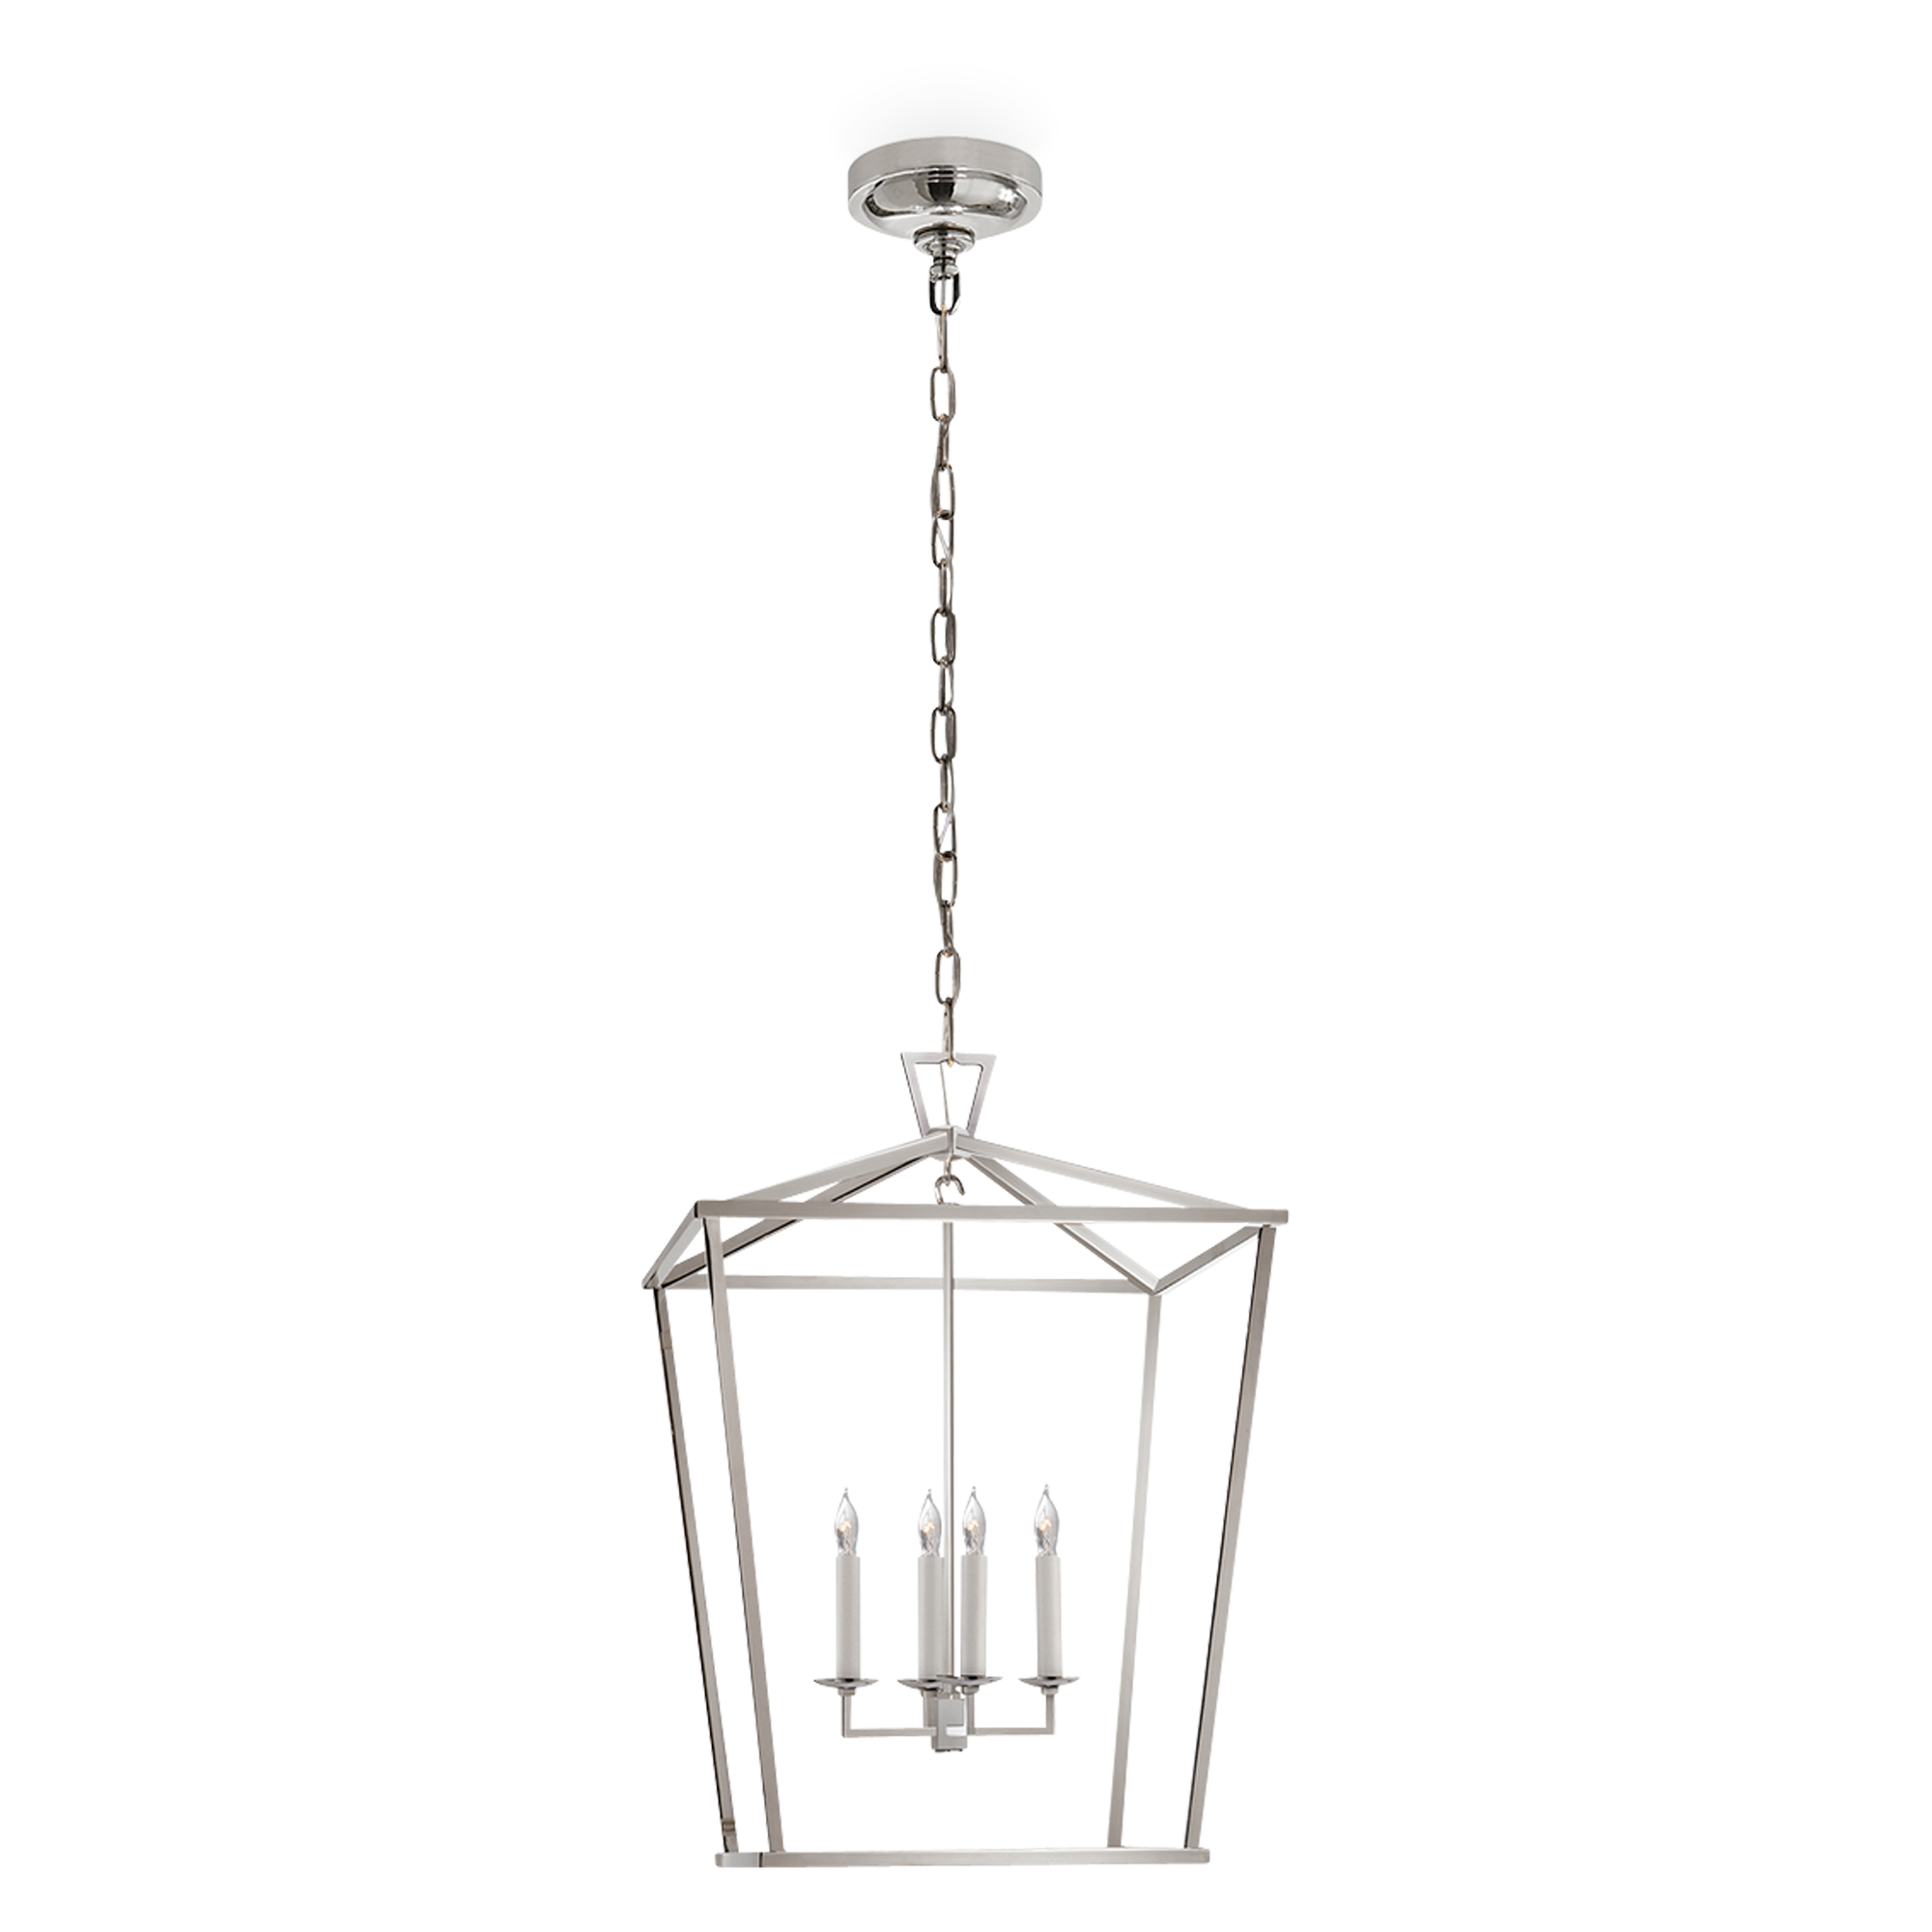 A modern lantern pendant featuring an open metalwork frame in a polished nickel finish.